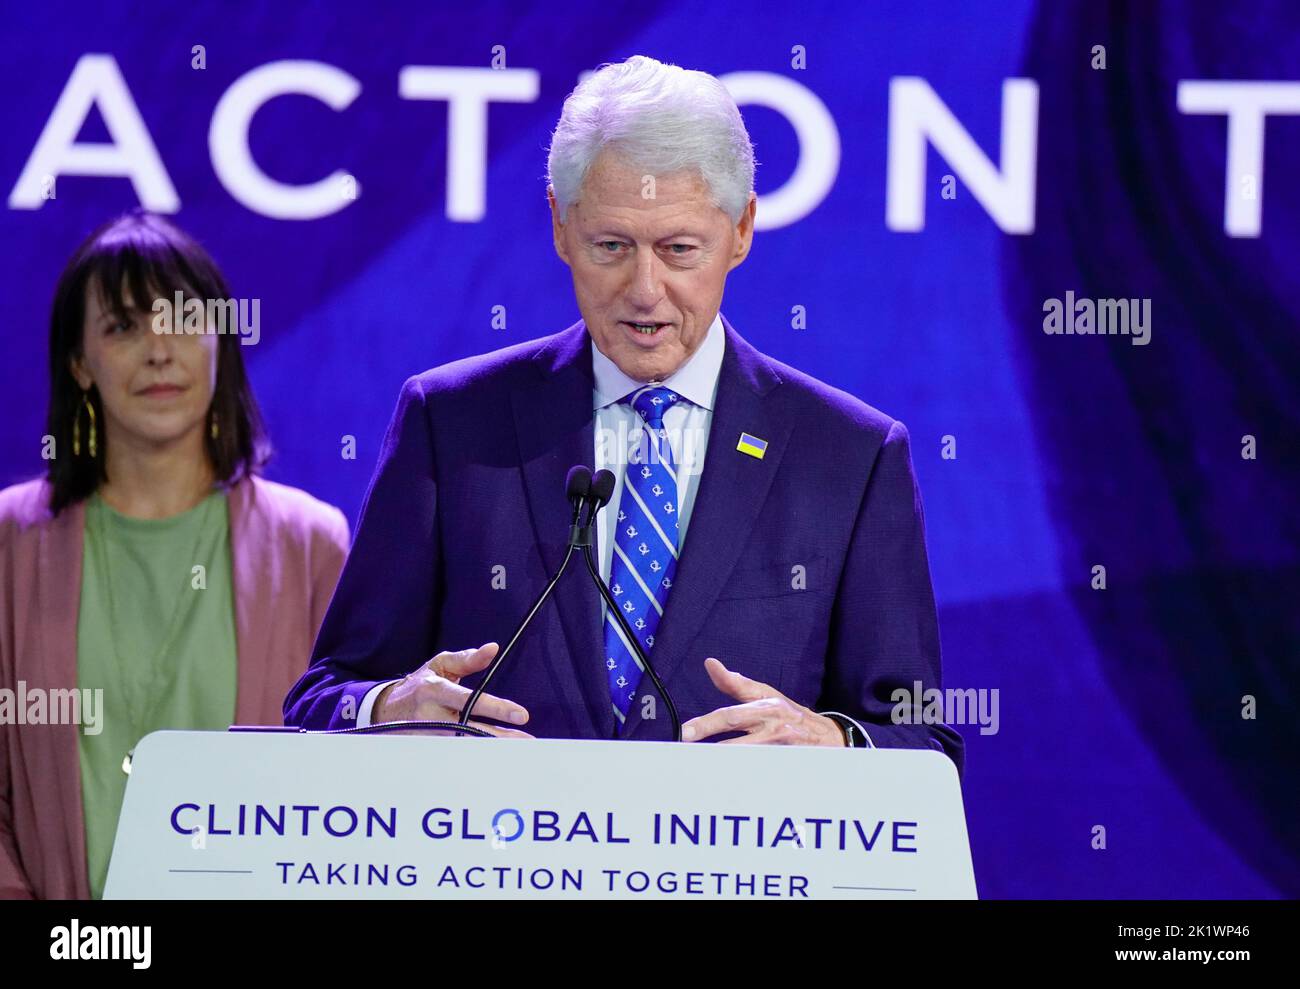 09/20/2022 New York City, New York President William Jefferson Clinton, Bill Clinton, President Clinton during the 2022 Clinton Global Initiative held at Hilton Midtown Tuesday September 20, 2022 in New York City. Photo by Jennifer Graylock-Alamy News 917-519-7666 Stock Photo